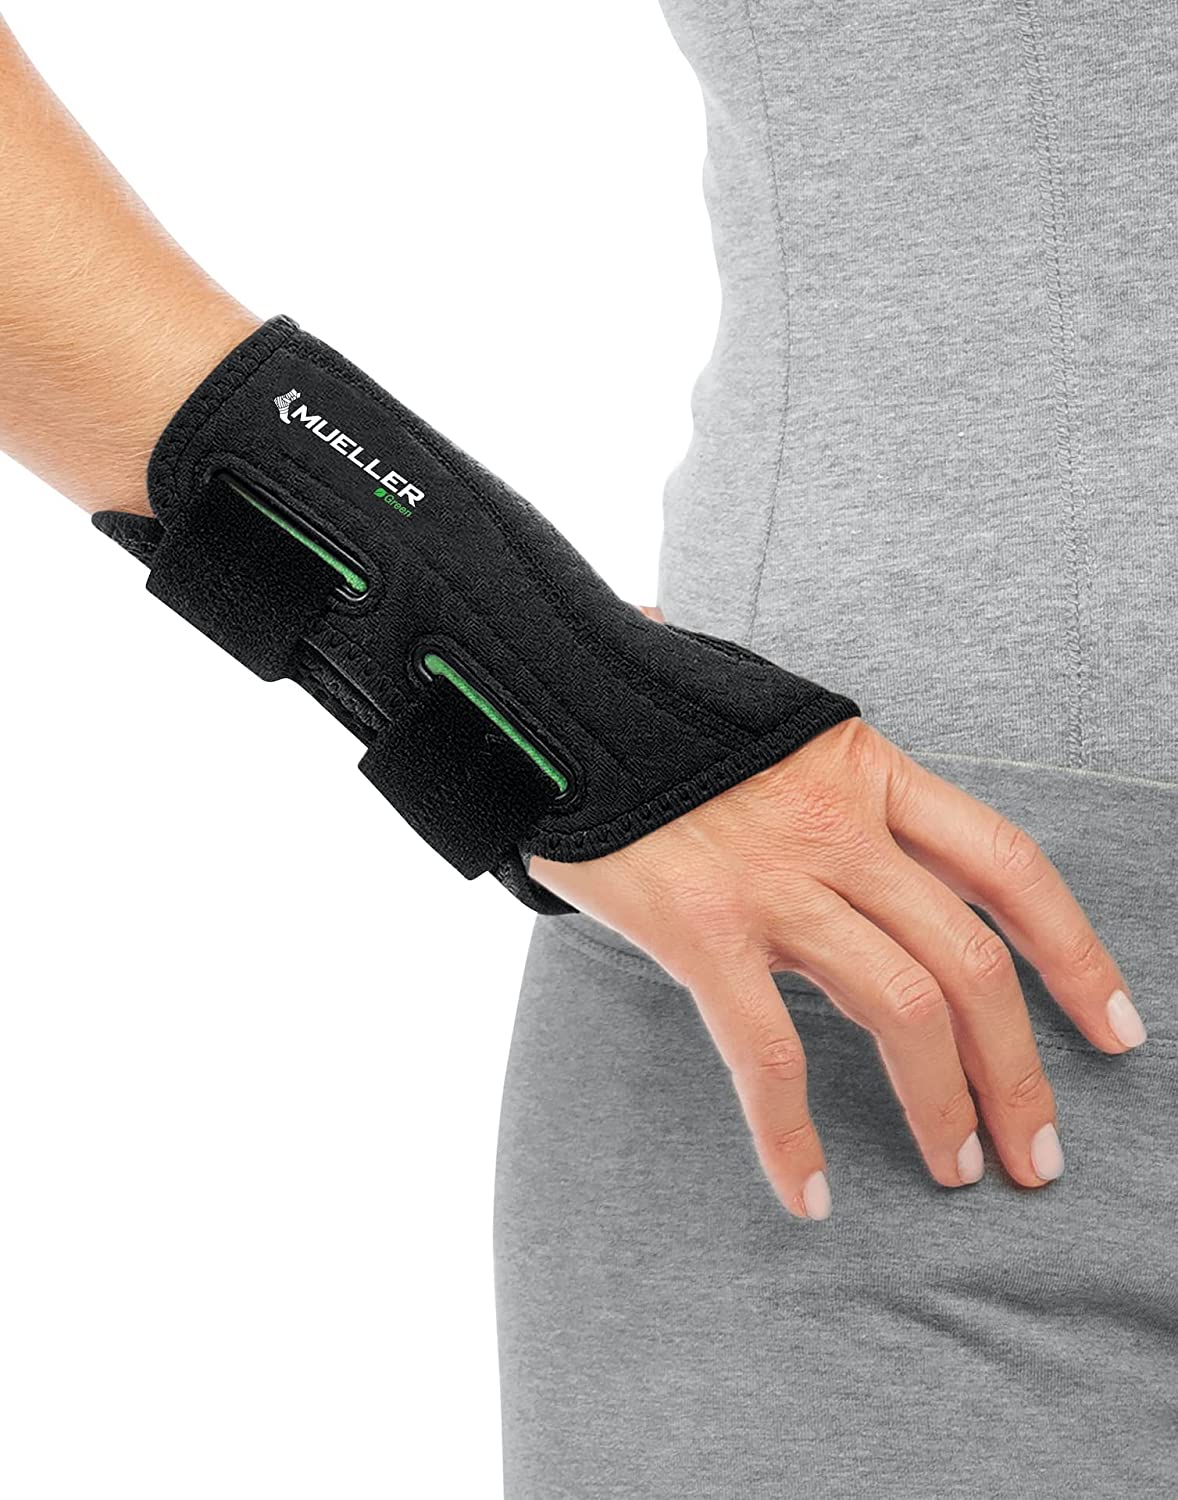 Mueller Latex-Free Recycled Materials Wrist Brace